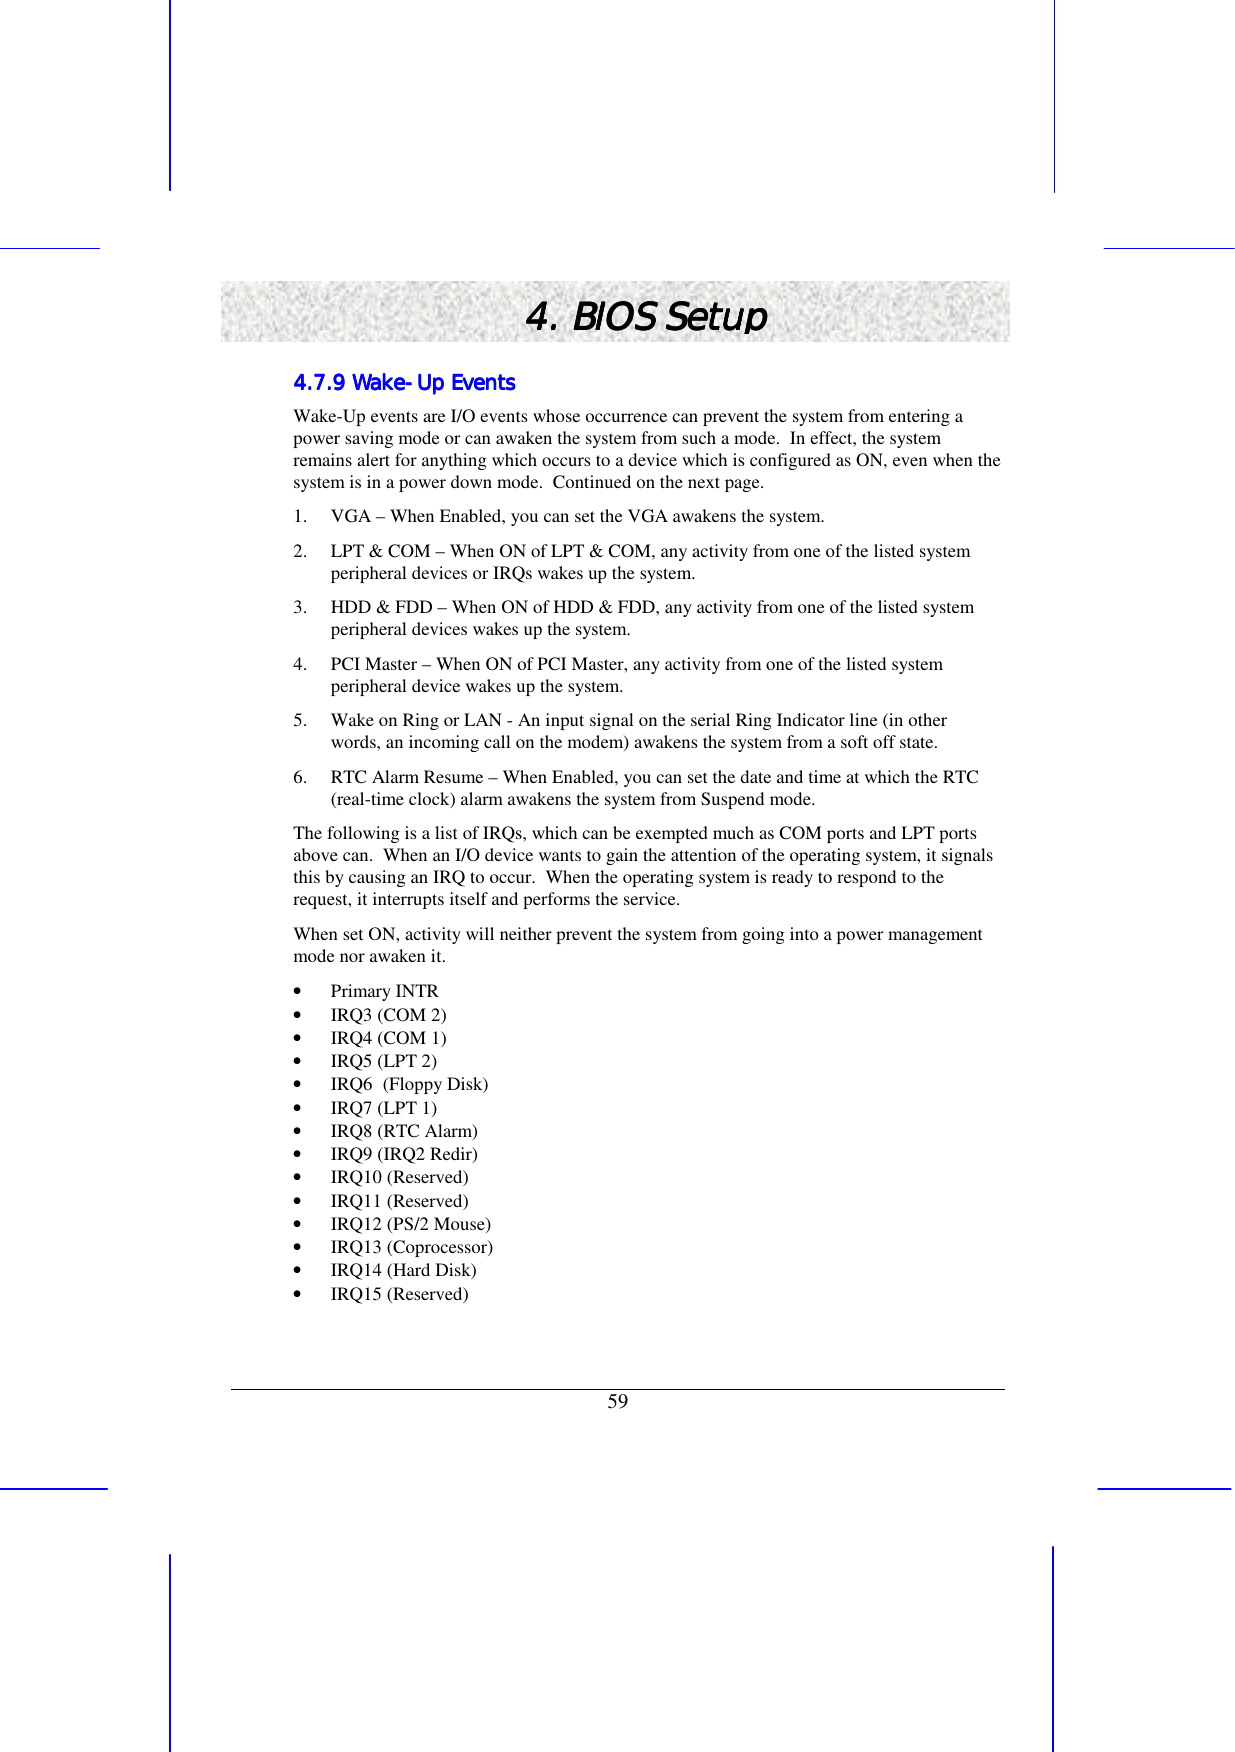   59 4. BIOS Setup4. BIOS Setup4. BIOS Setup4. BIOS Setup    4.7.9 Wake4.7.9 Wake4.7.9 Wake4.7.9 Wake----Up EventsUp EventsUp EventsUp Events    Wake-Up events are I/O events whose occurrence can prevent the system from entering a power saving mode or can awaken the system from such a mode.  In effect, the system remains alert for anything which occurs to a device which is configured as ON, even when the system is in a power down mode.  Continued on the next page. 1.  VGA – When Enabled, you can set the VGA awakens the system. 2.  LPT &amp; COM – When ON of LPT &amp; COM, any activity from one of the listed system peripheral devices or IRQs wakes up the system. 3.  HDD &amp; FDD – When ON of HDD &amp; FDD, any activity from one of the listed system peripheral devices wakes up the system. 4.  PCI Master – When ON of PCI Master, any activity from one of the listed system peripheral device wakes up the system. 5.  Wake on Ring or LAN - An input signal on the serial Ring Indicator line (in other words, an incoming call on the modem) awakens the system from a soft off state. 6.  RTC Alarm Resume – When Enabled, you can set the date and time at which the RTC (real-time clock) alarm awakens the system from Suspend mode. The following is a list of IRQs, which can be exempted much as COM ports and LPT ports above can.  When an I/O device wants to gain the attention of the operating system, it signals this by causing an IRQ to occur.  When the operating system is ready to respond to the request, it interrupts itself and performs the service. When set ON, activity will neither prevent the system from going into a power management mode nor awaken it. •  Primary INTR •  IRQ3 (COM 2) •  IRQ4 (COM 1) •  IRQ5 (LPT 2) •  IRQ6 (Floppy Disk) •  IRQ7 (LPT 1) •  IRQ8 (RTC Alarm) •  IRQ9 (IRQ2 Redir) •  IRQ10 (Reserved) •  IRQ11 (Reserved) •  IRQ12 (PS/2 Mouse) •  IRQ13 (Coprocessor) •  IRQ14 (Hard Disk) •  IRQ15 (Reserved) 